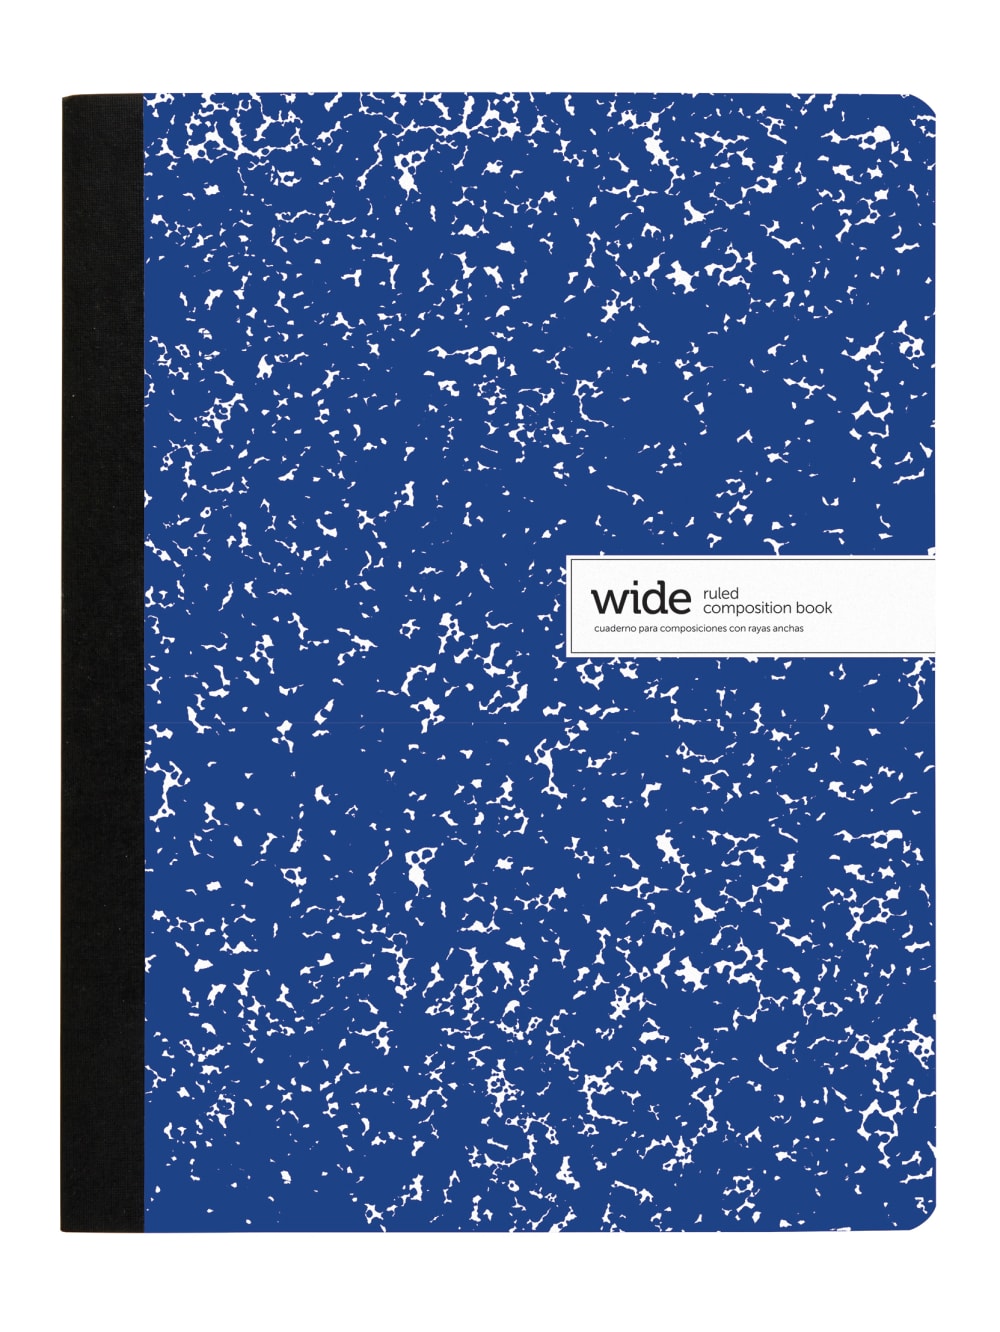 Office Depot® Brand Composition Notebook, 9-3/4" x 7-1/2", Wide Ruled, 200 Pages (100 Sheets), Blue
				
		        		












	
			
				
				 
					Item # 
					
						
							
							
								6901441